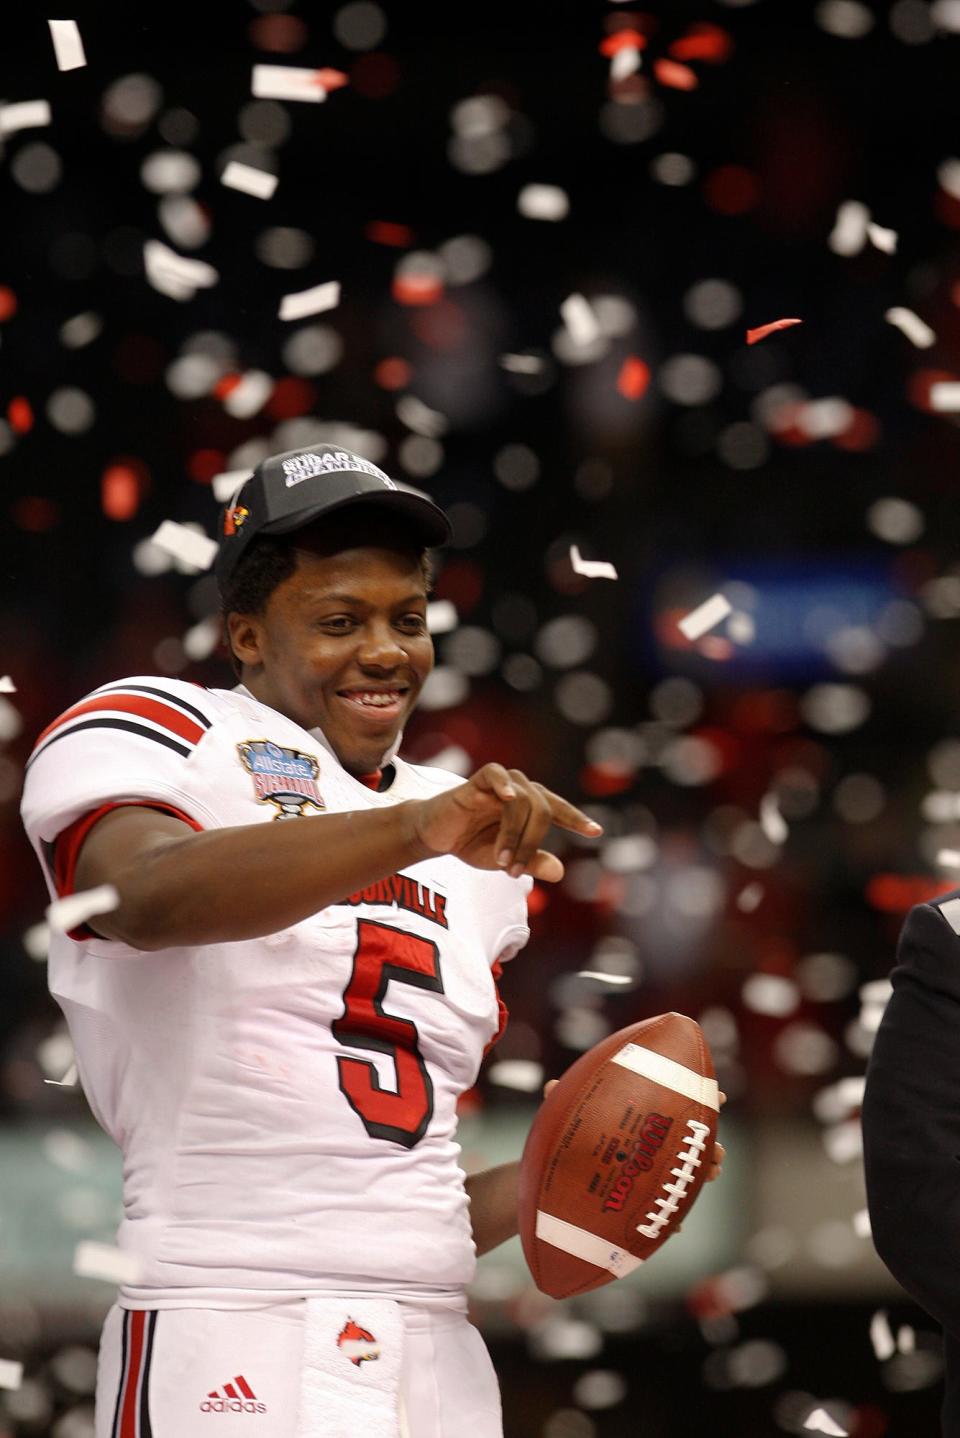 U of L's Teddy Bridgewater, #5, is named MVP after their 33 to 23 win over the Florida Gators in the Allstate Sugar Bowl at Mercedes-Benz Superdome on January 2, 2013 in New Orleans, Louisiana.